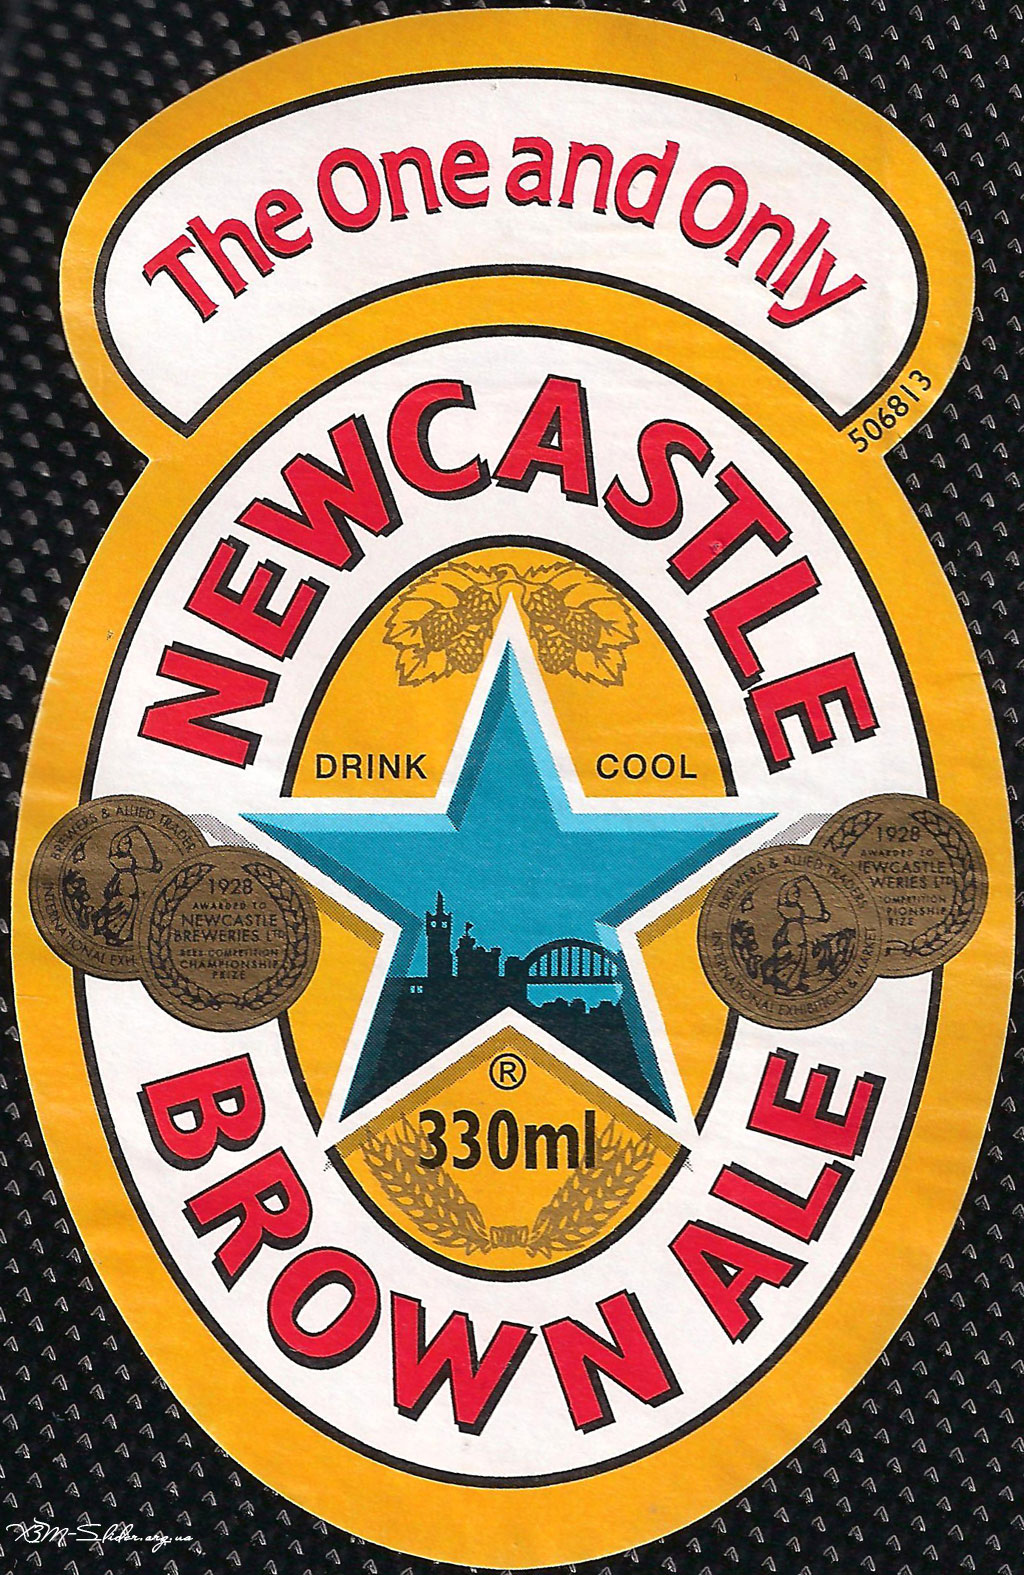 Newcastle - Brown Ale - The One and Only